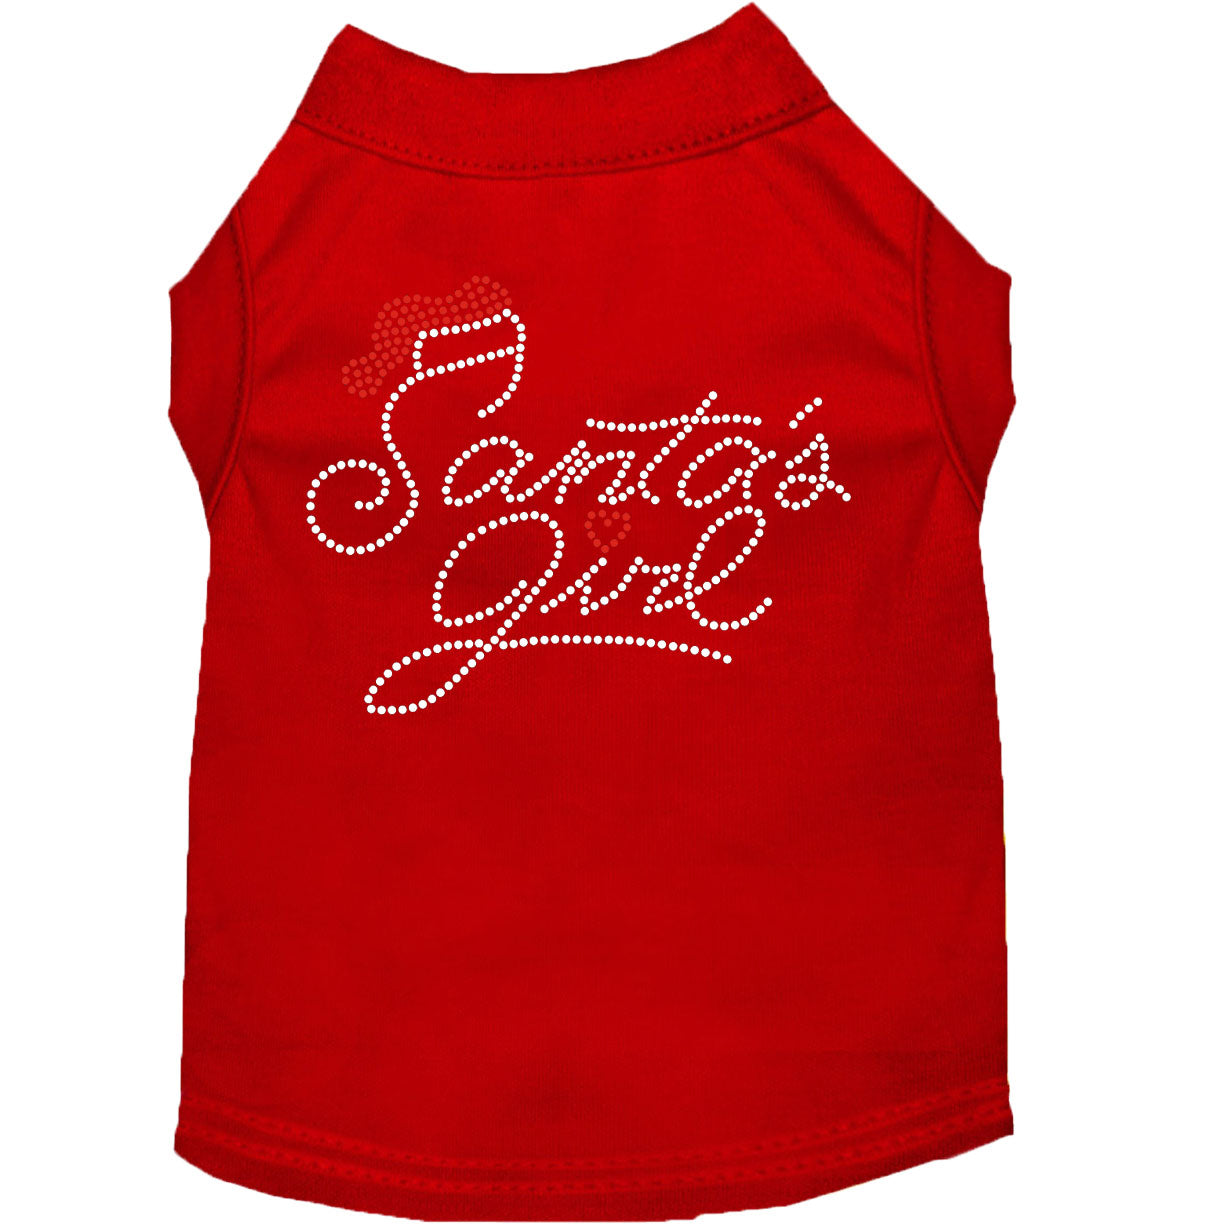 Santa's Girl Rhinestone Shirts for Cats and Dogs